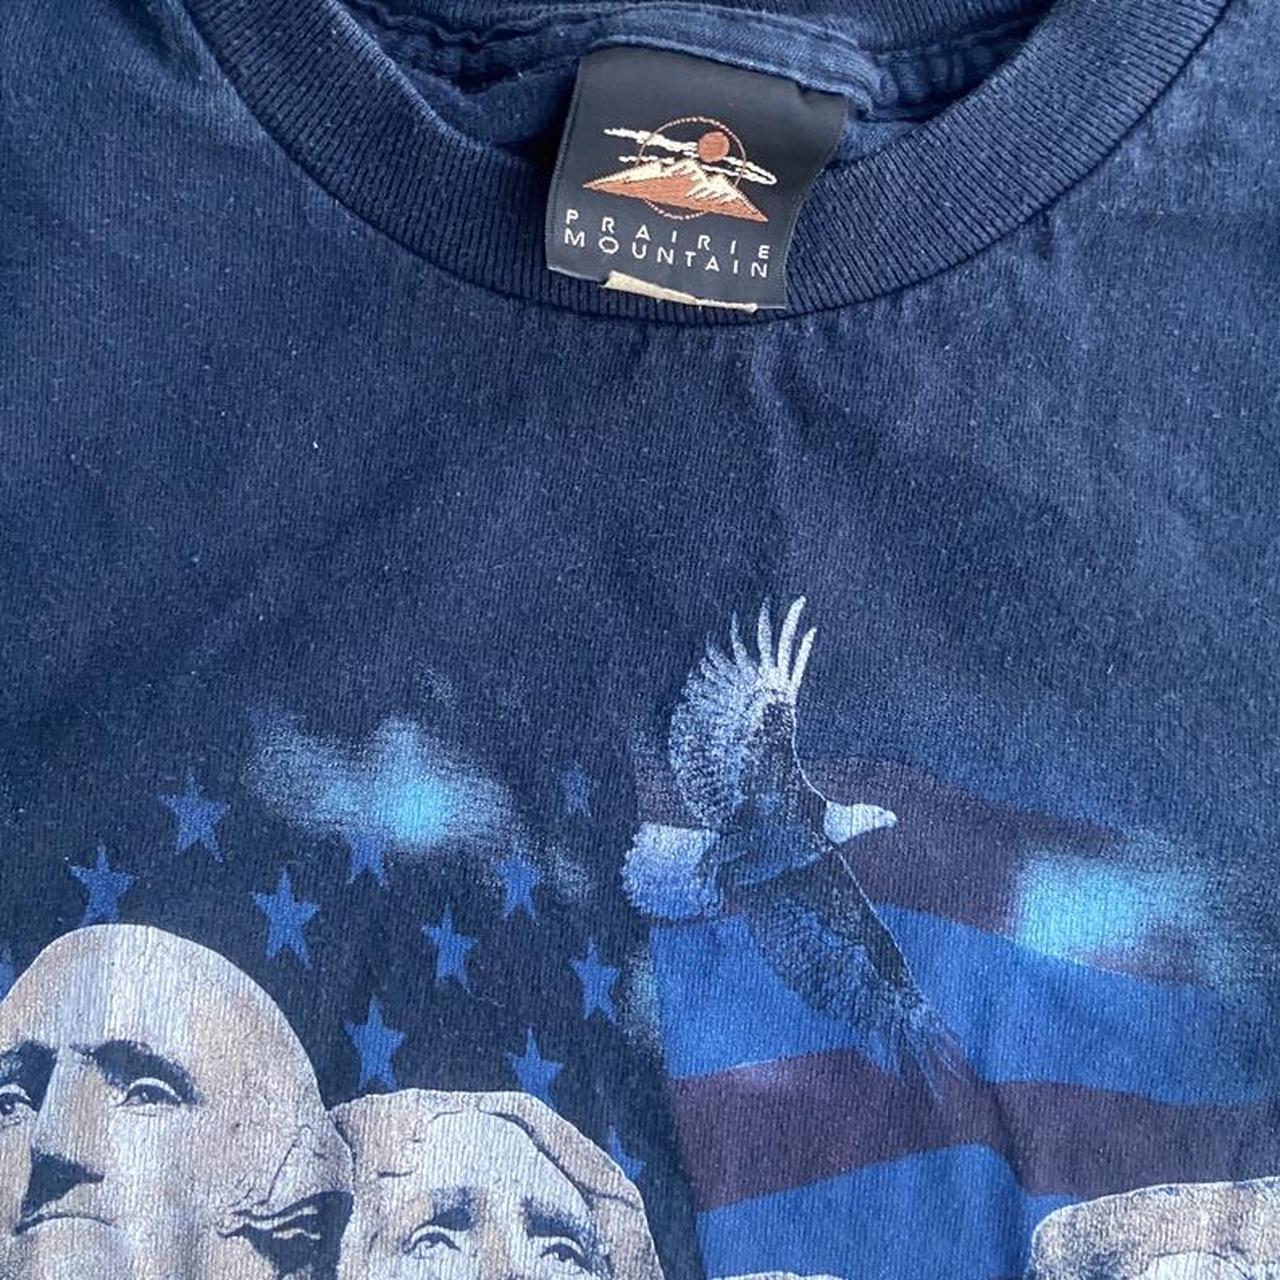 Product Image 4 - Praire Mountain-Mount Rushmore Tee
Excellent condition